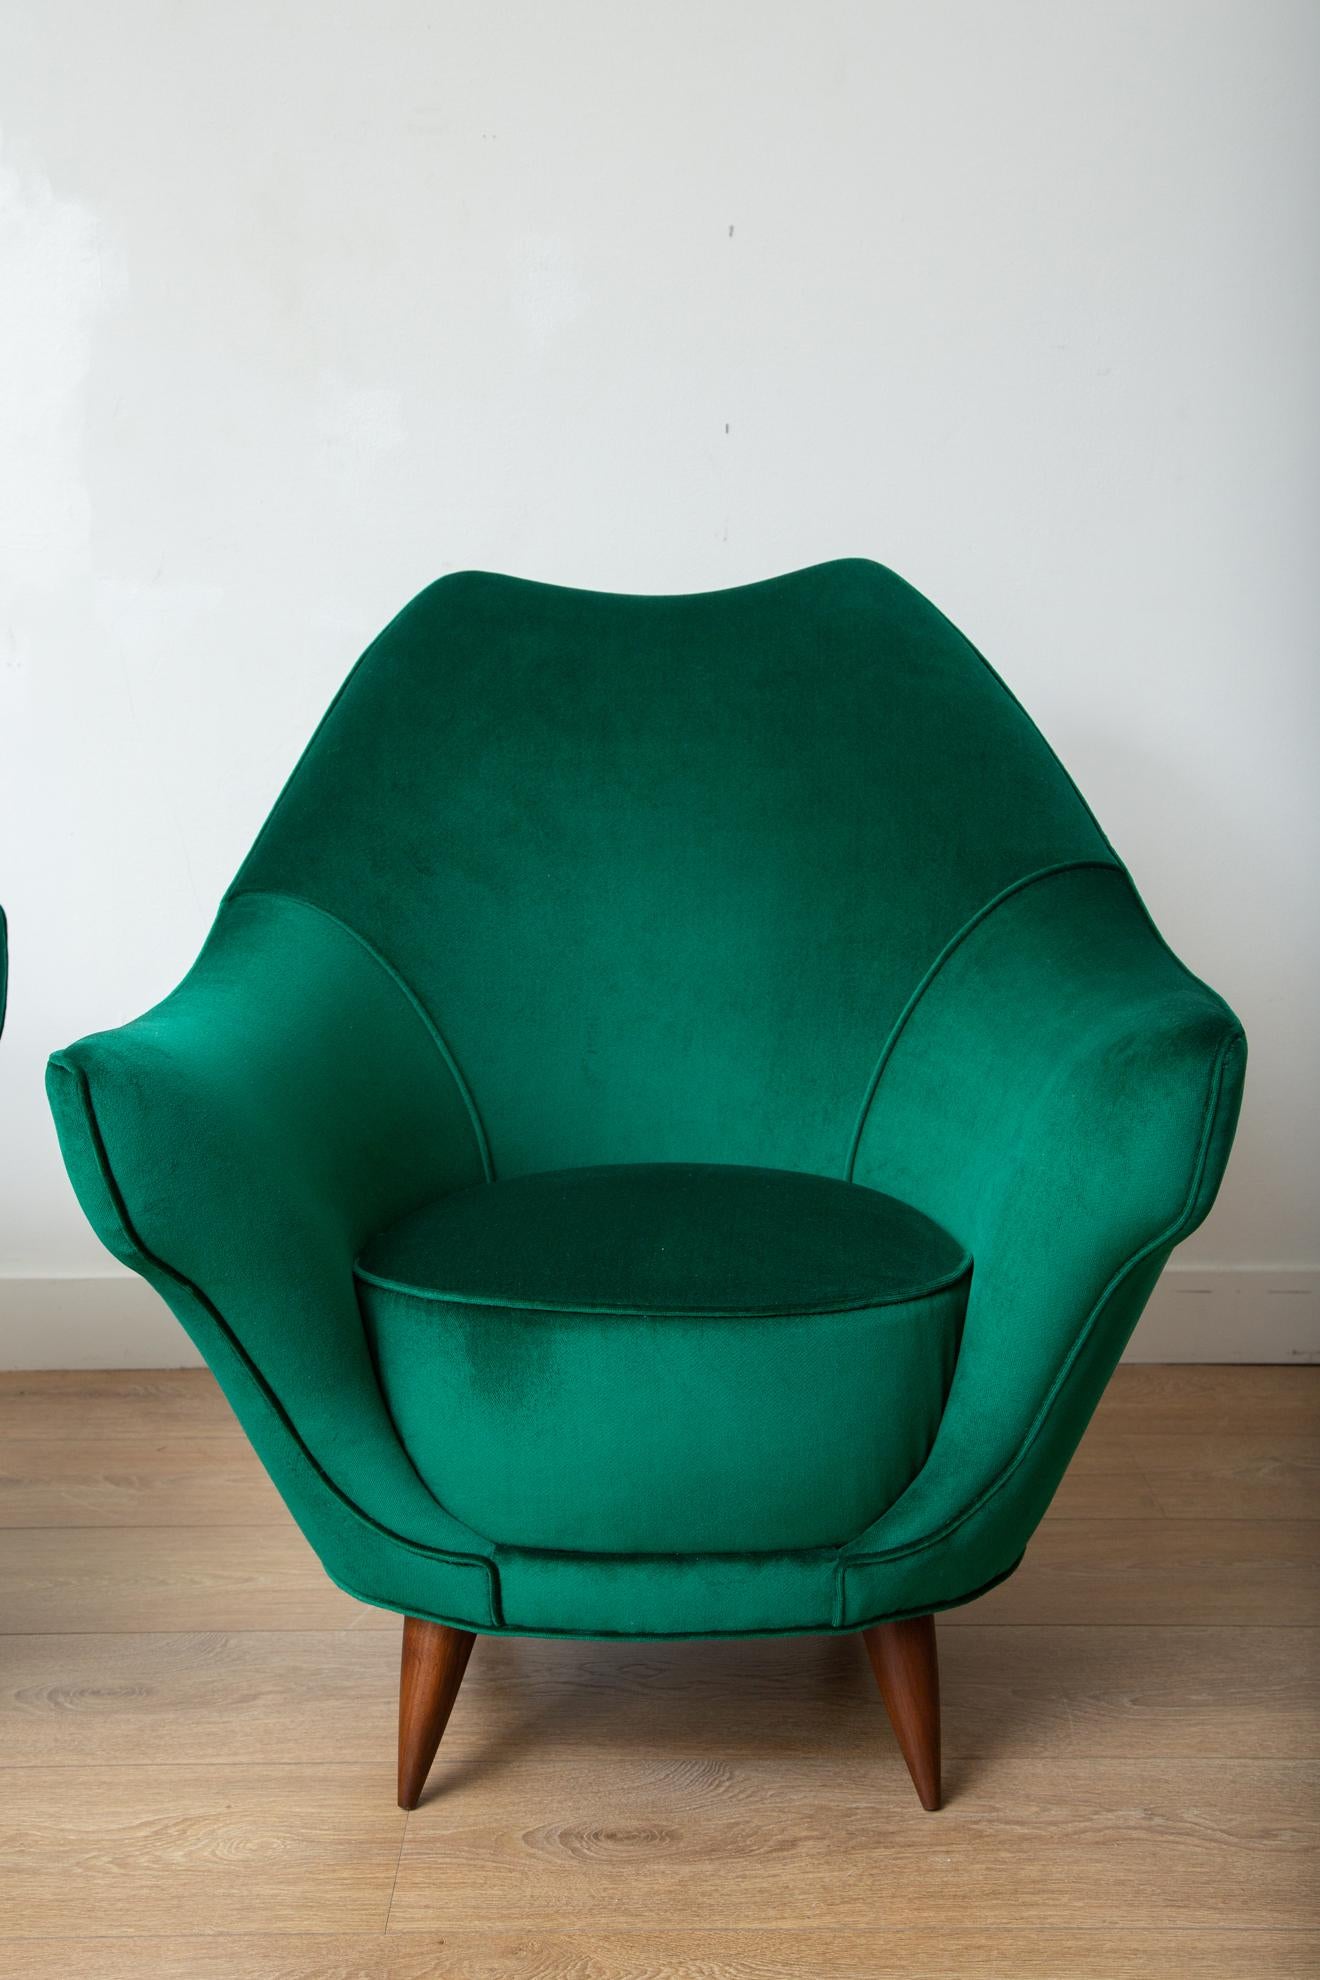 Pair of Mid-Century Modern Italian Lounge Chairs in Emerald Green Velvet In Excellent Condition For Sale In Miami, FL